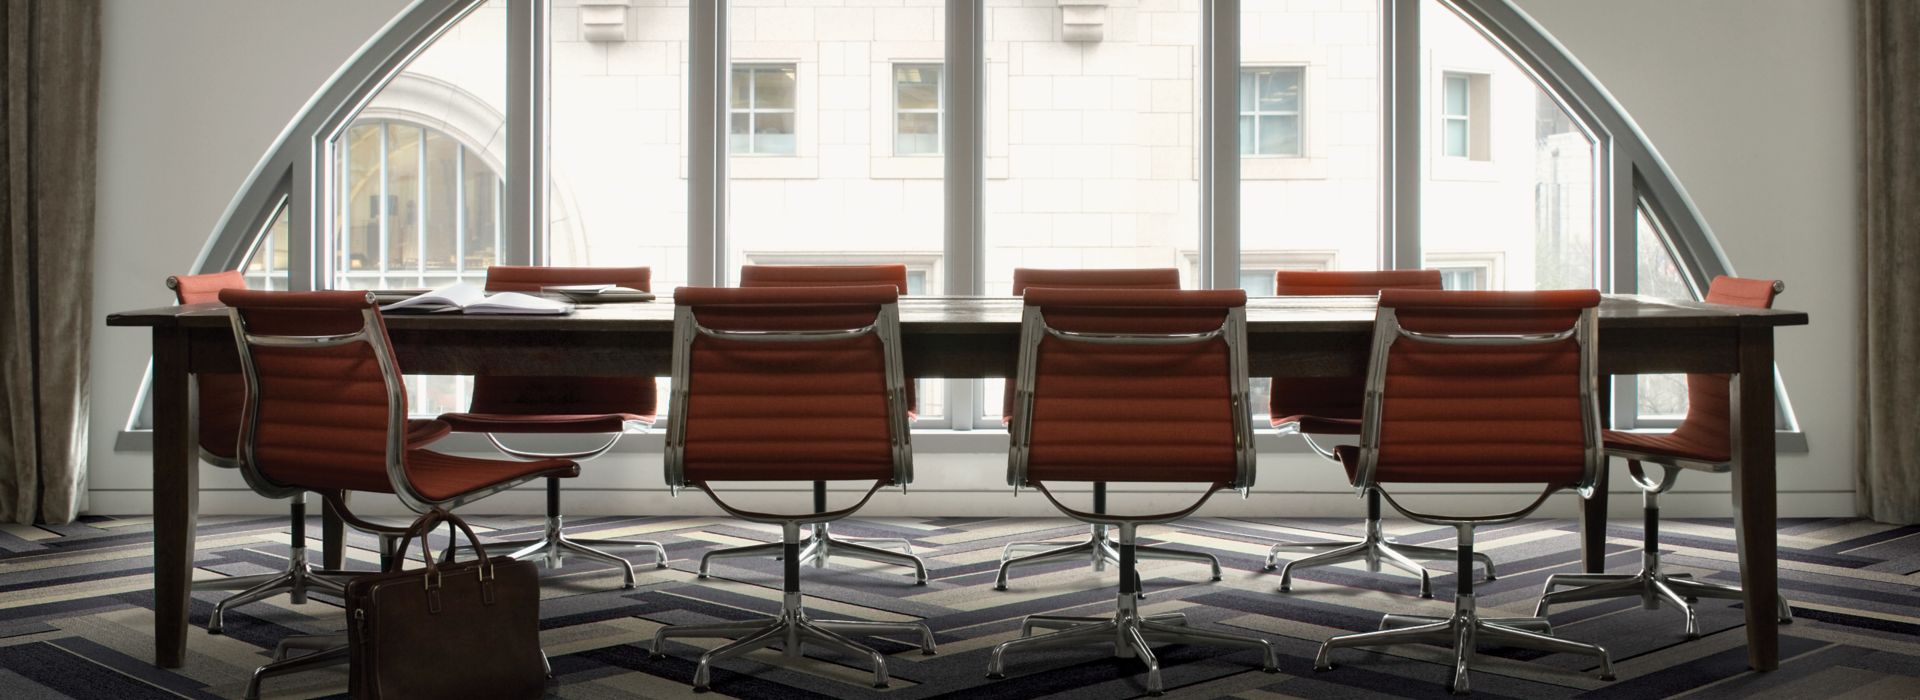 Interface PH210 plank carpet tile in naturally lighted meeting room with red chairs